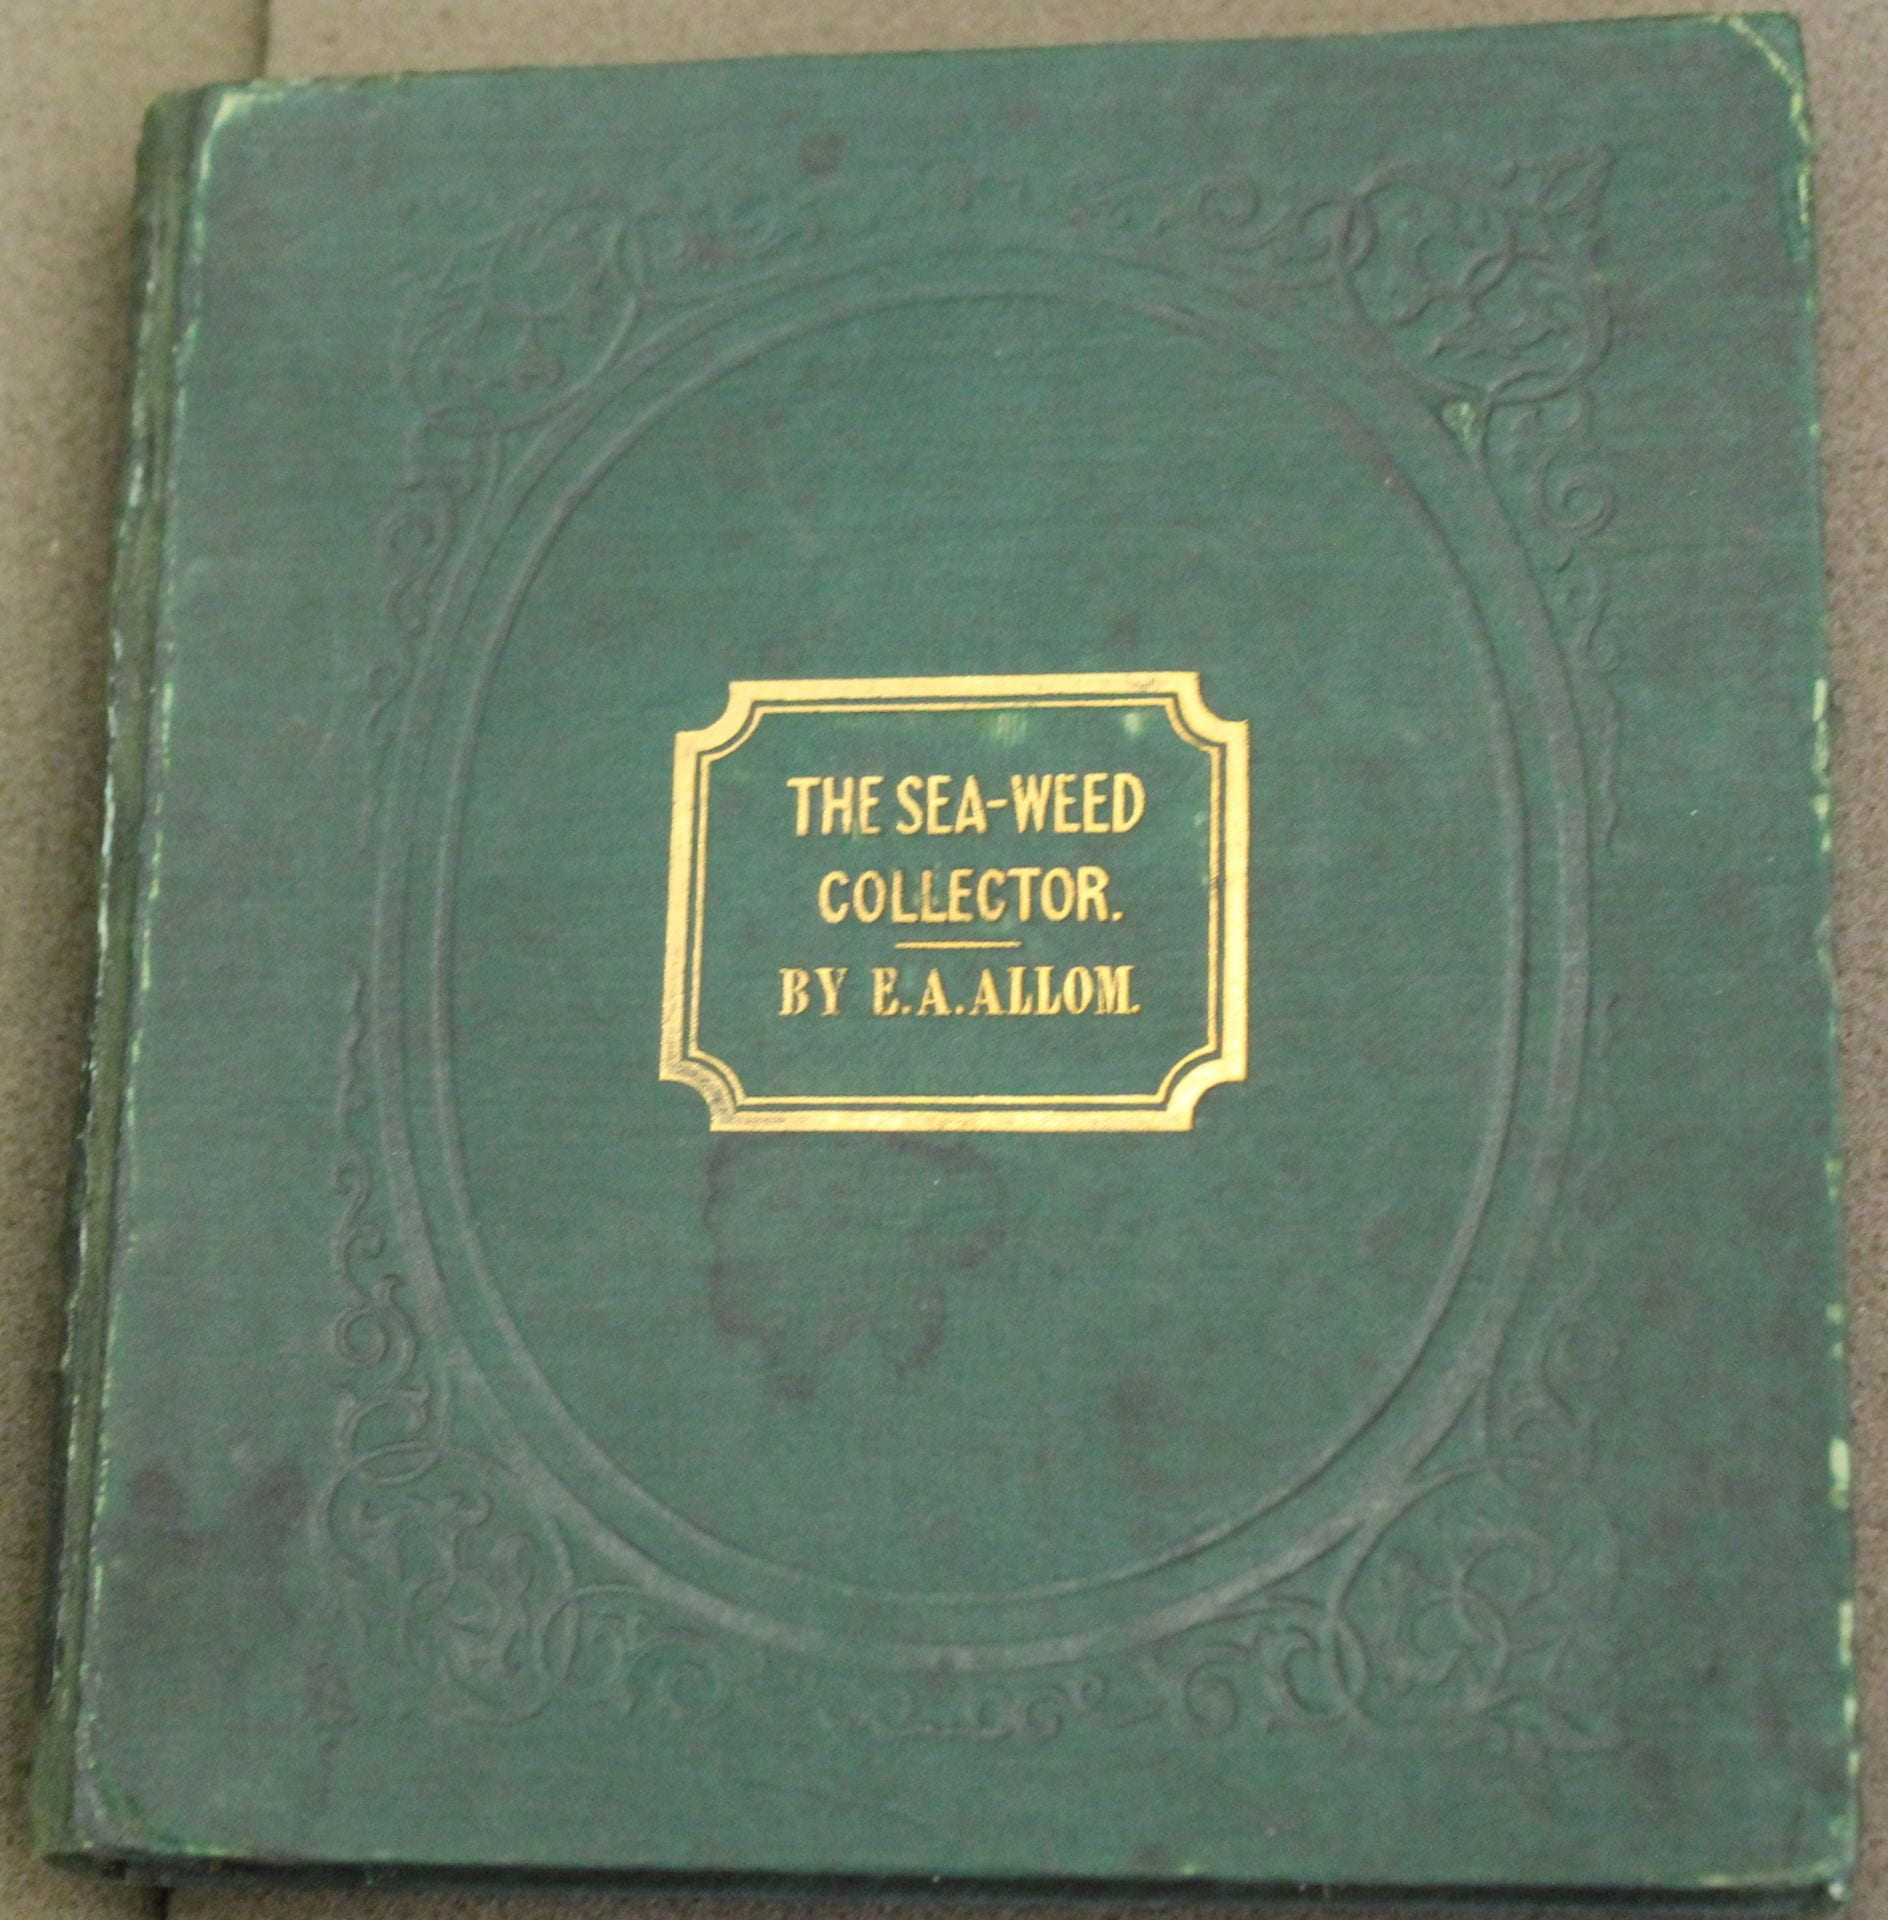 An image of a green book with a florally embossed cover, the title stamped in gold, and water stains.